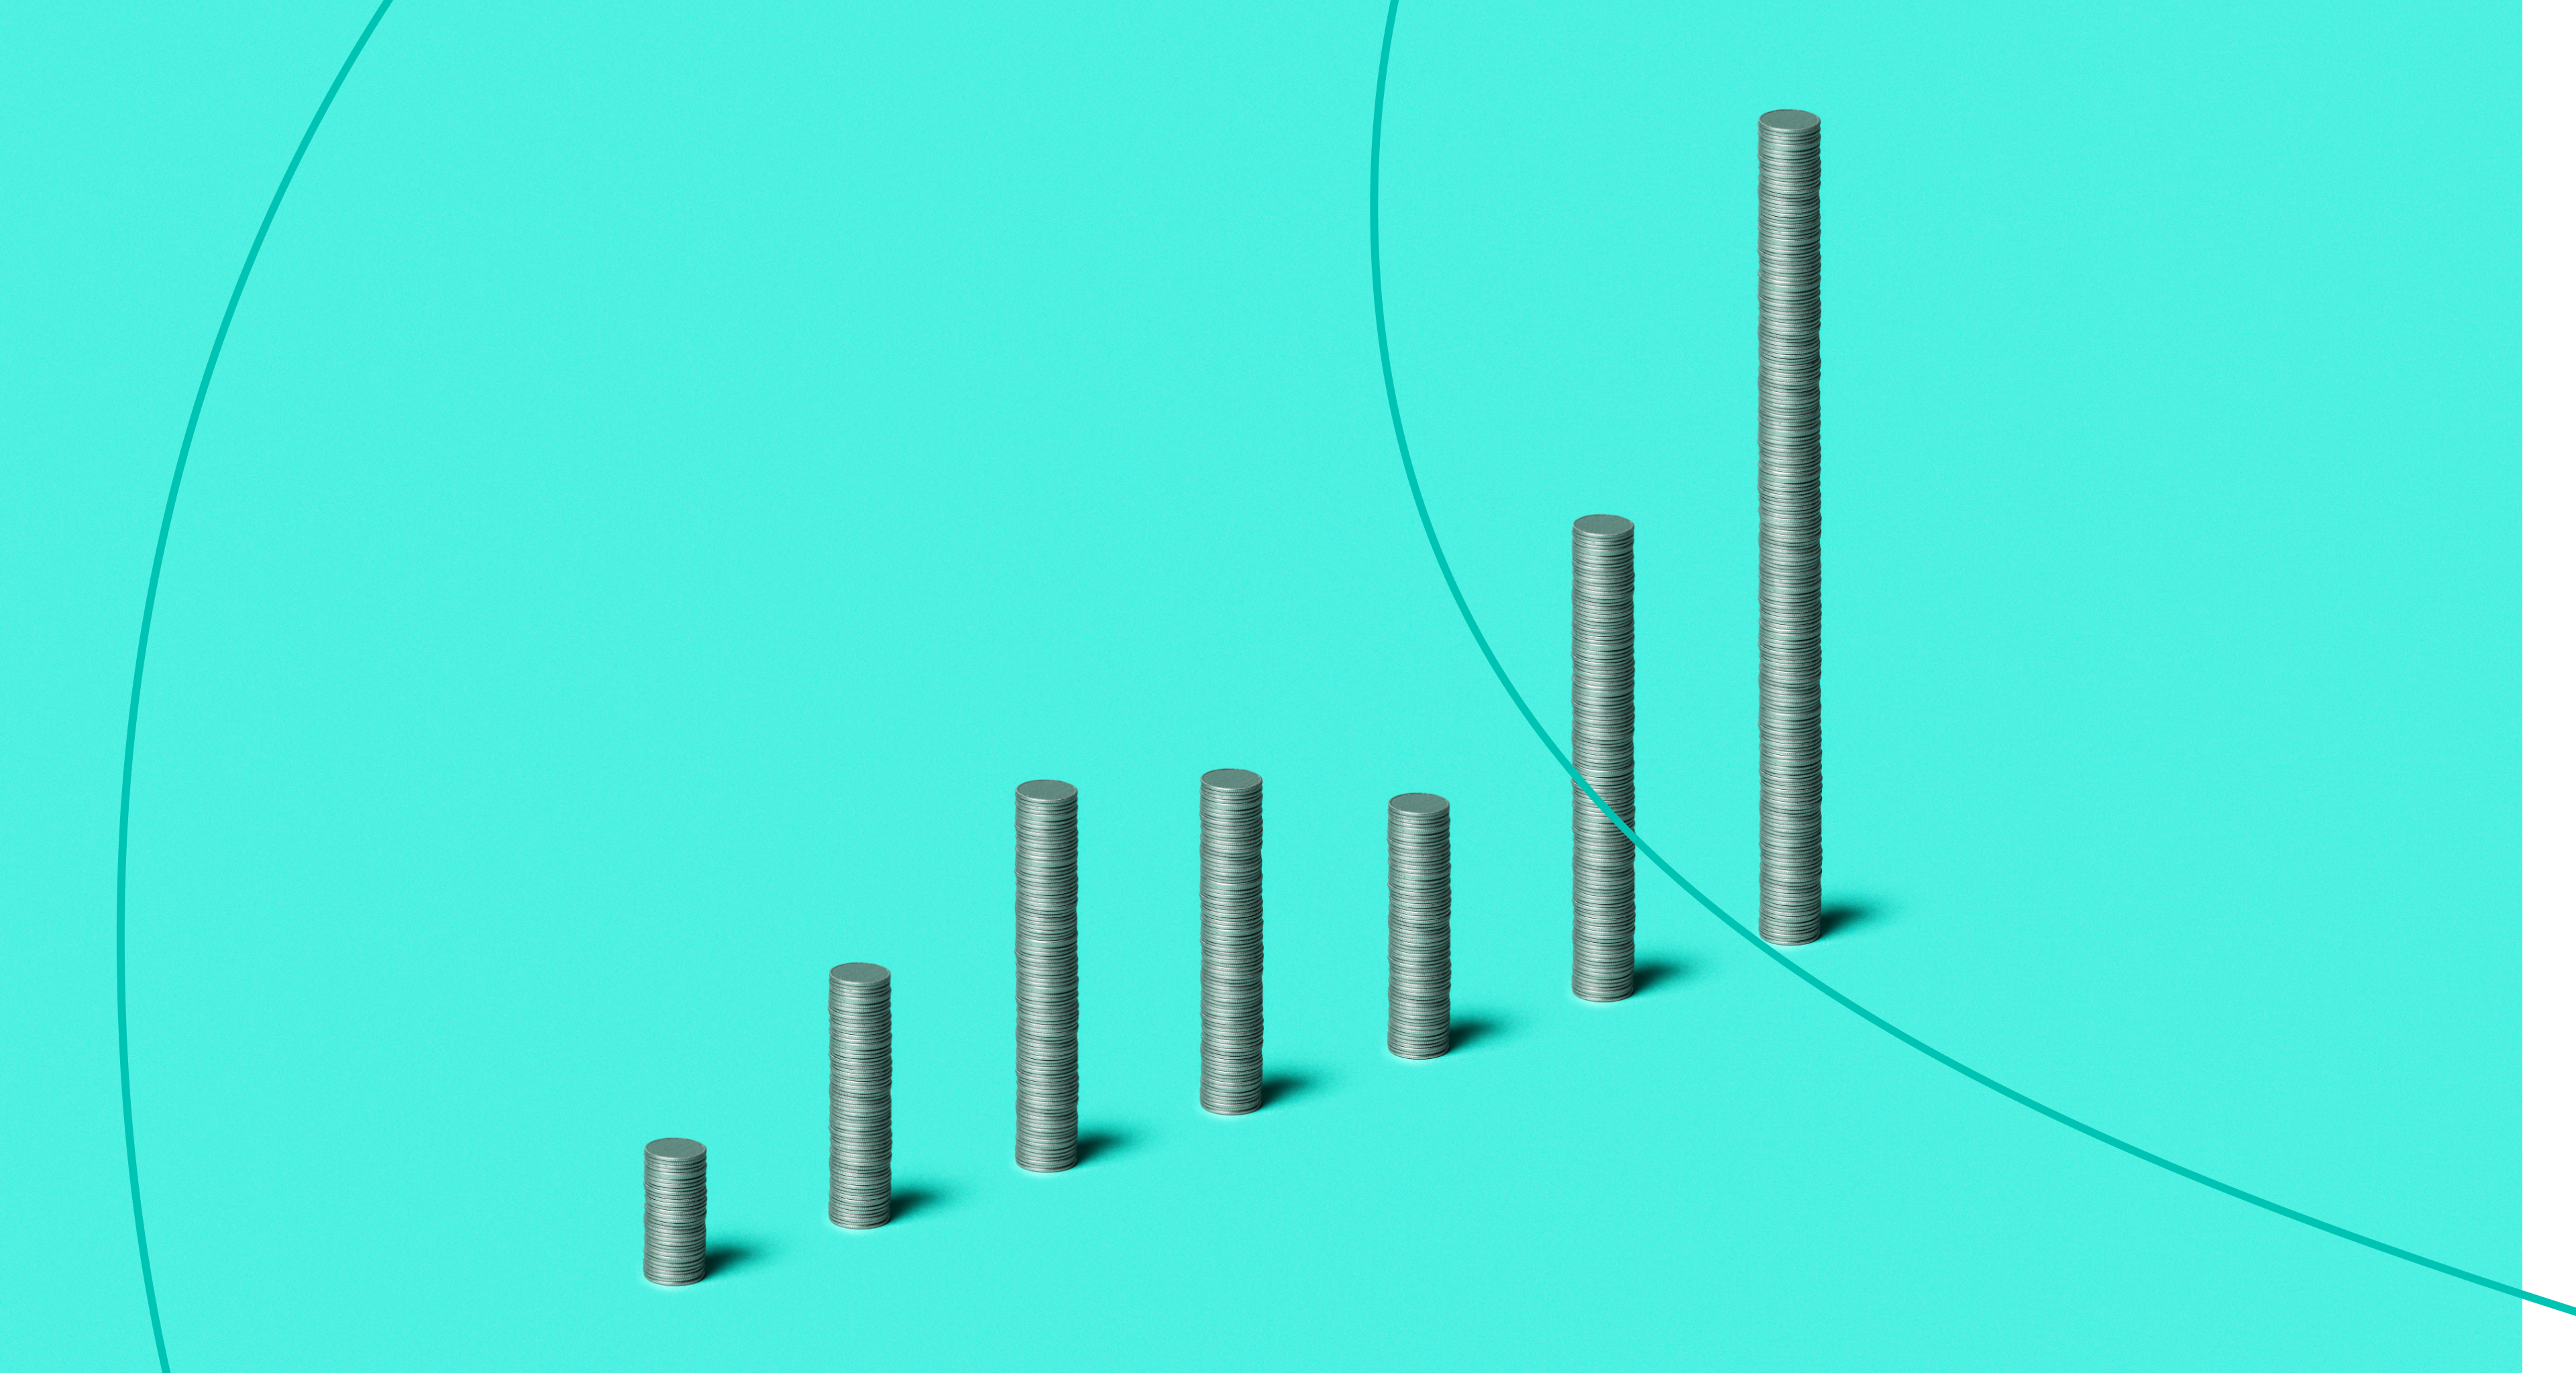 A vertical image of 7 coin stacks going up, down and then exponential up, conceptually looking like a graph on a turquoise light green background